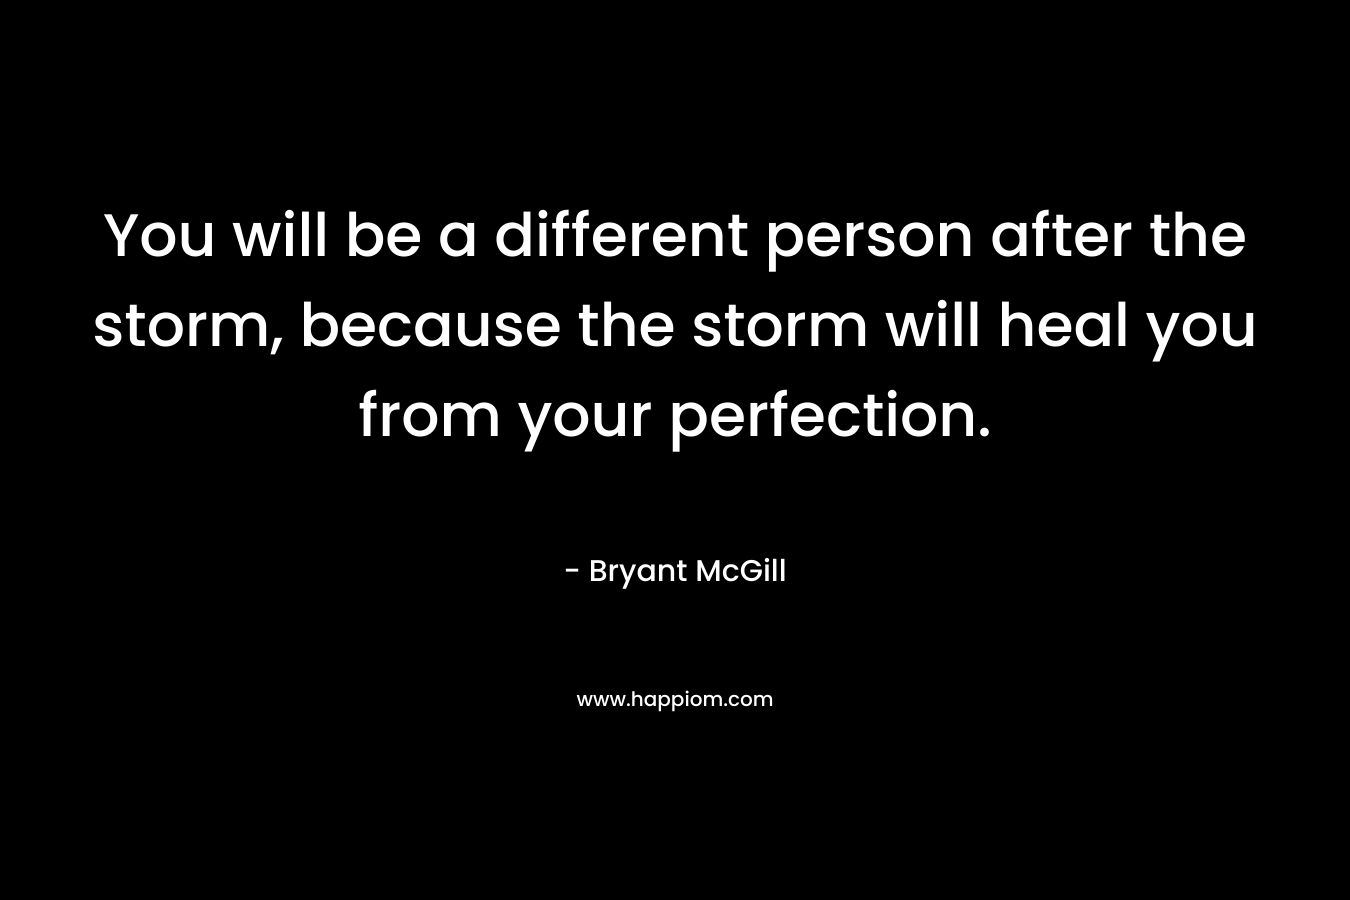 You will be a different person after the storm, because the storm will heal you from your perfection.